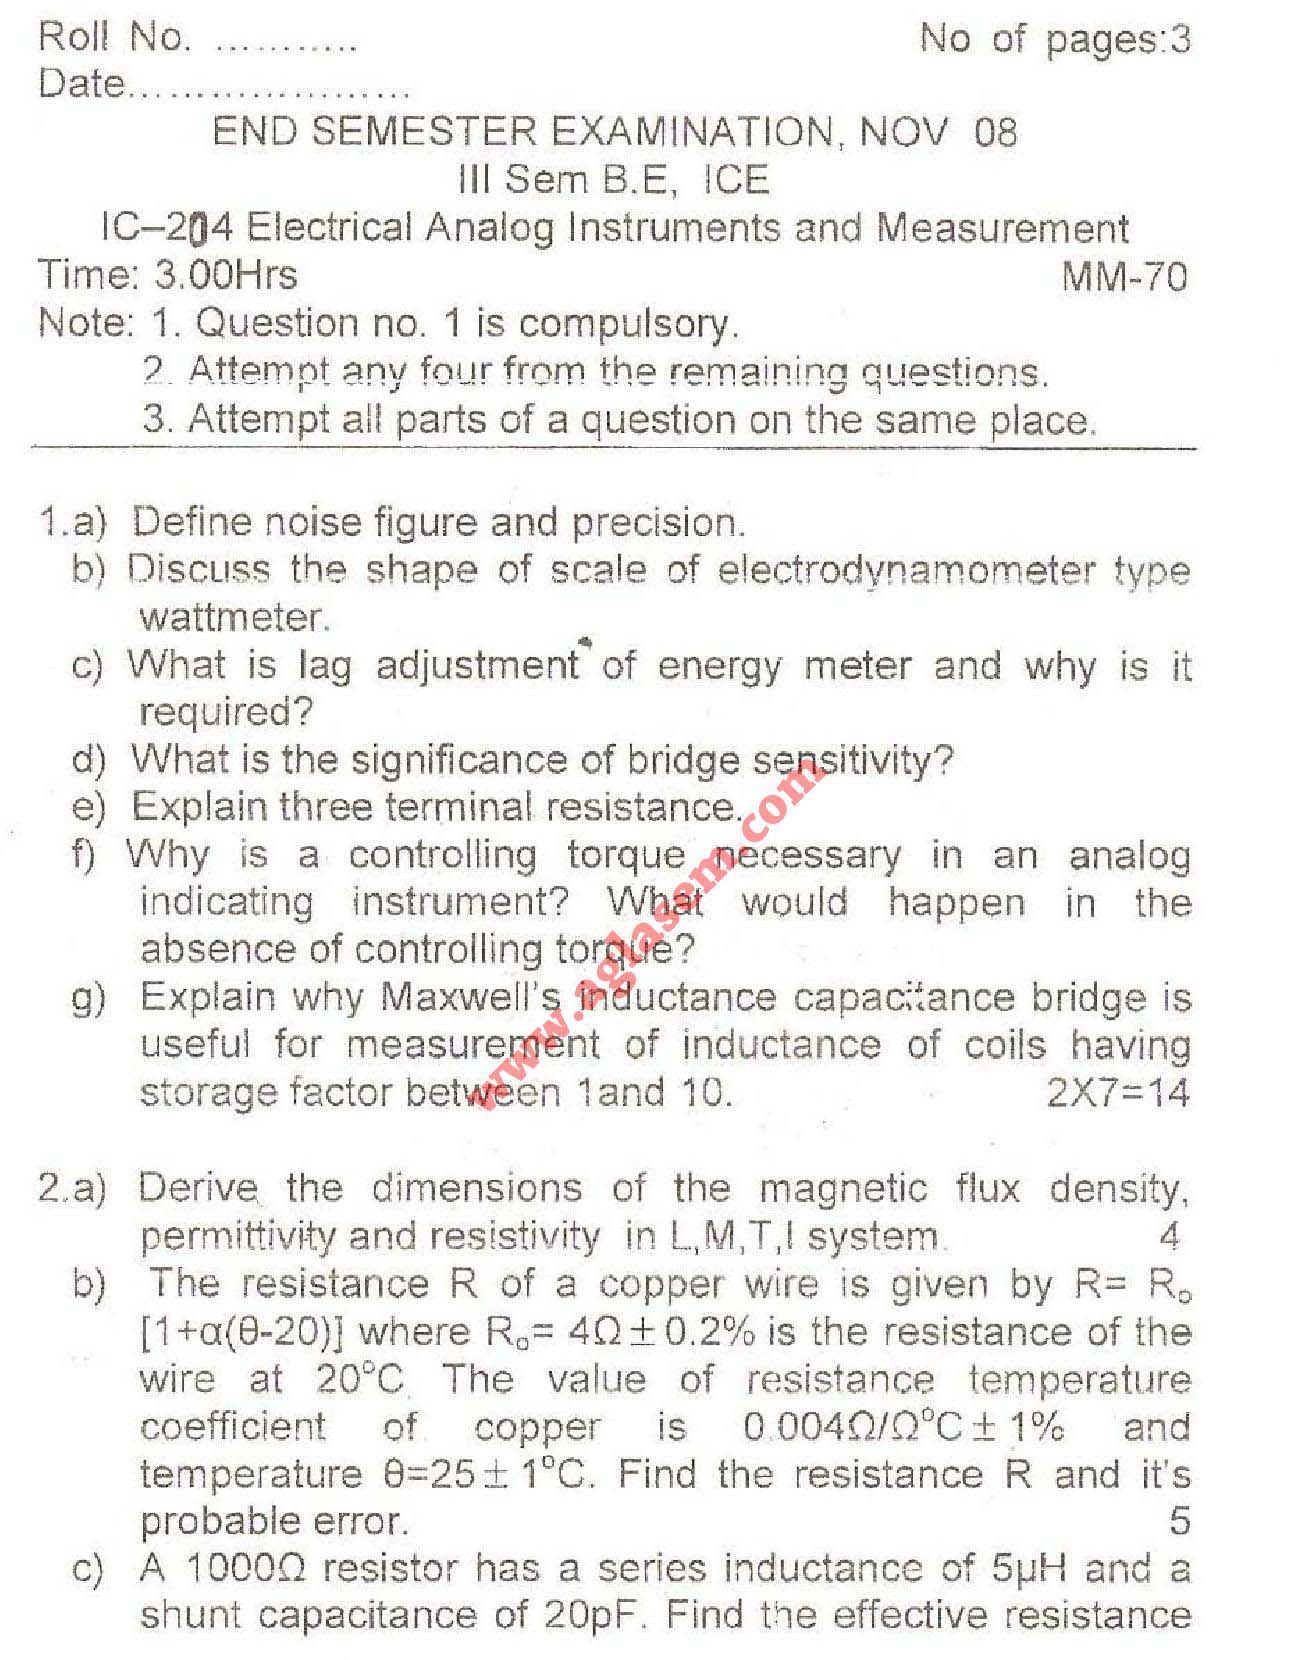 NSIT Question Papers 2008 – 3 Semester - End Sem - IC-204